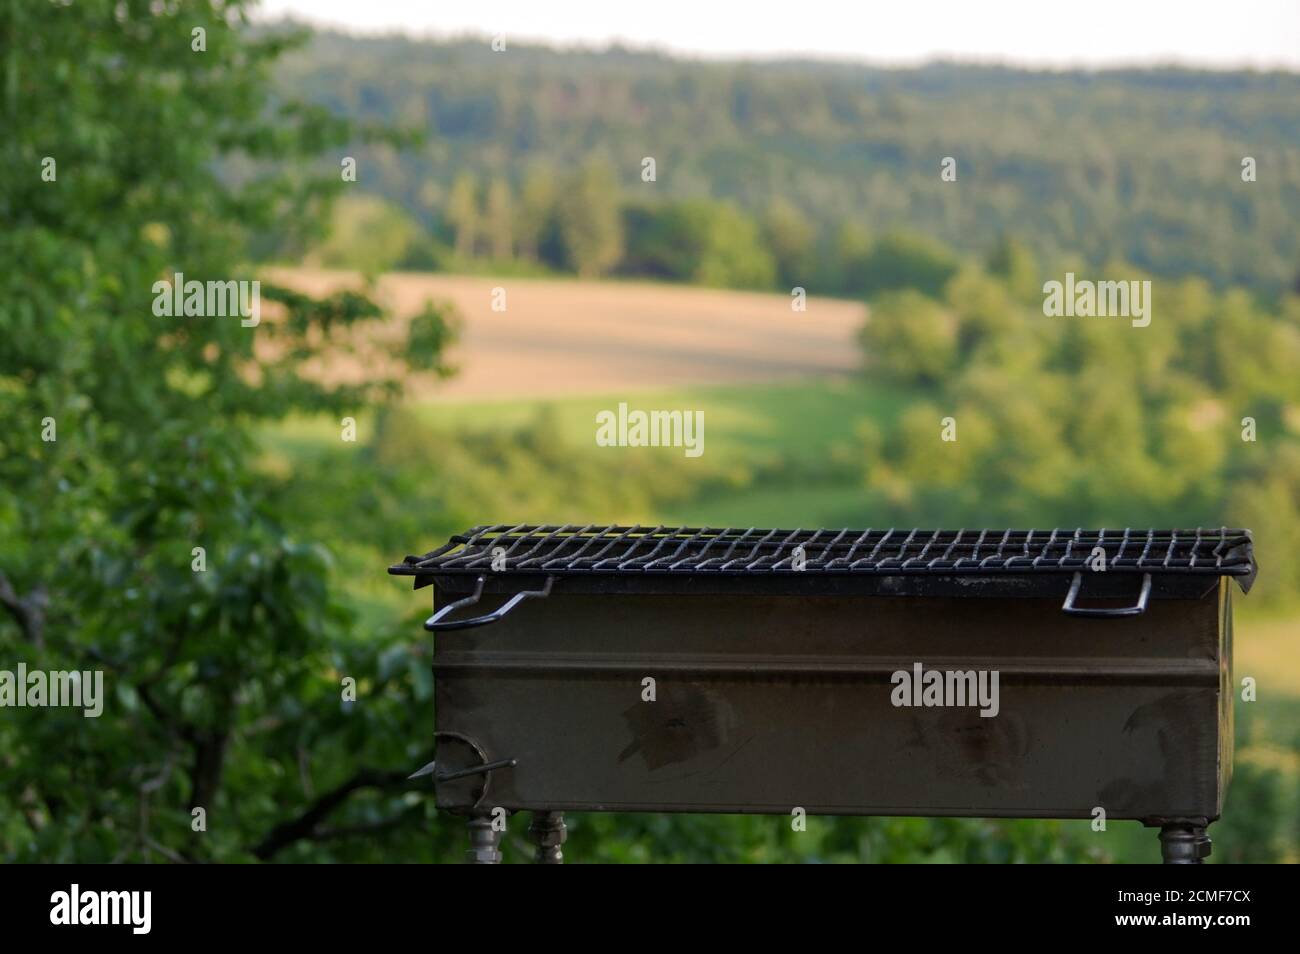 Empty portable BBQ grill in front of a fresh green summer landscape Stock Photo